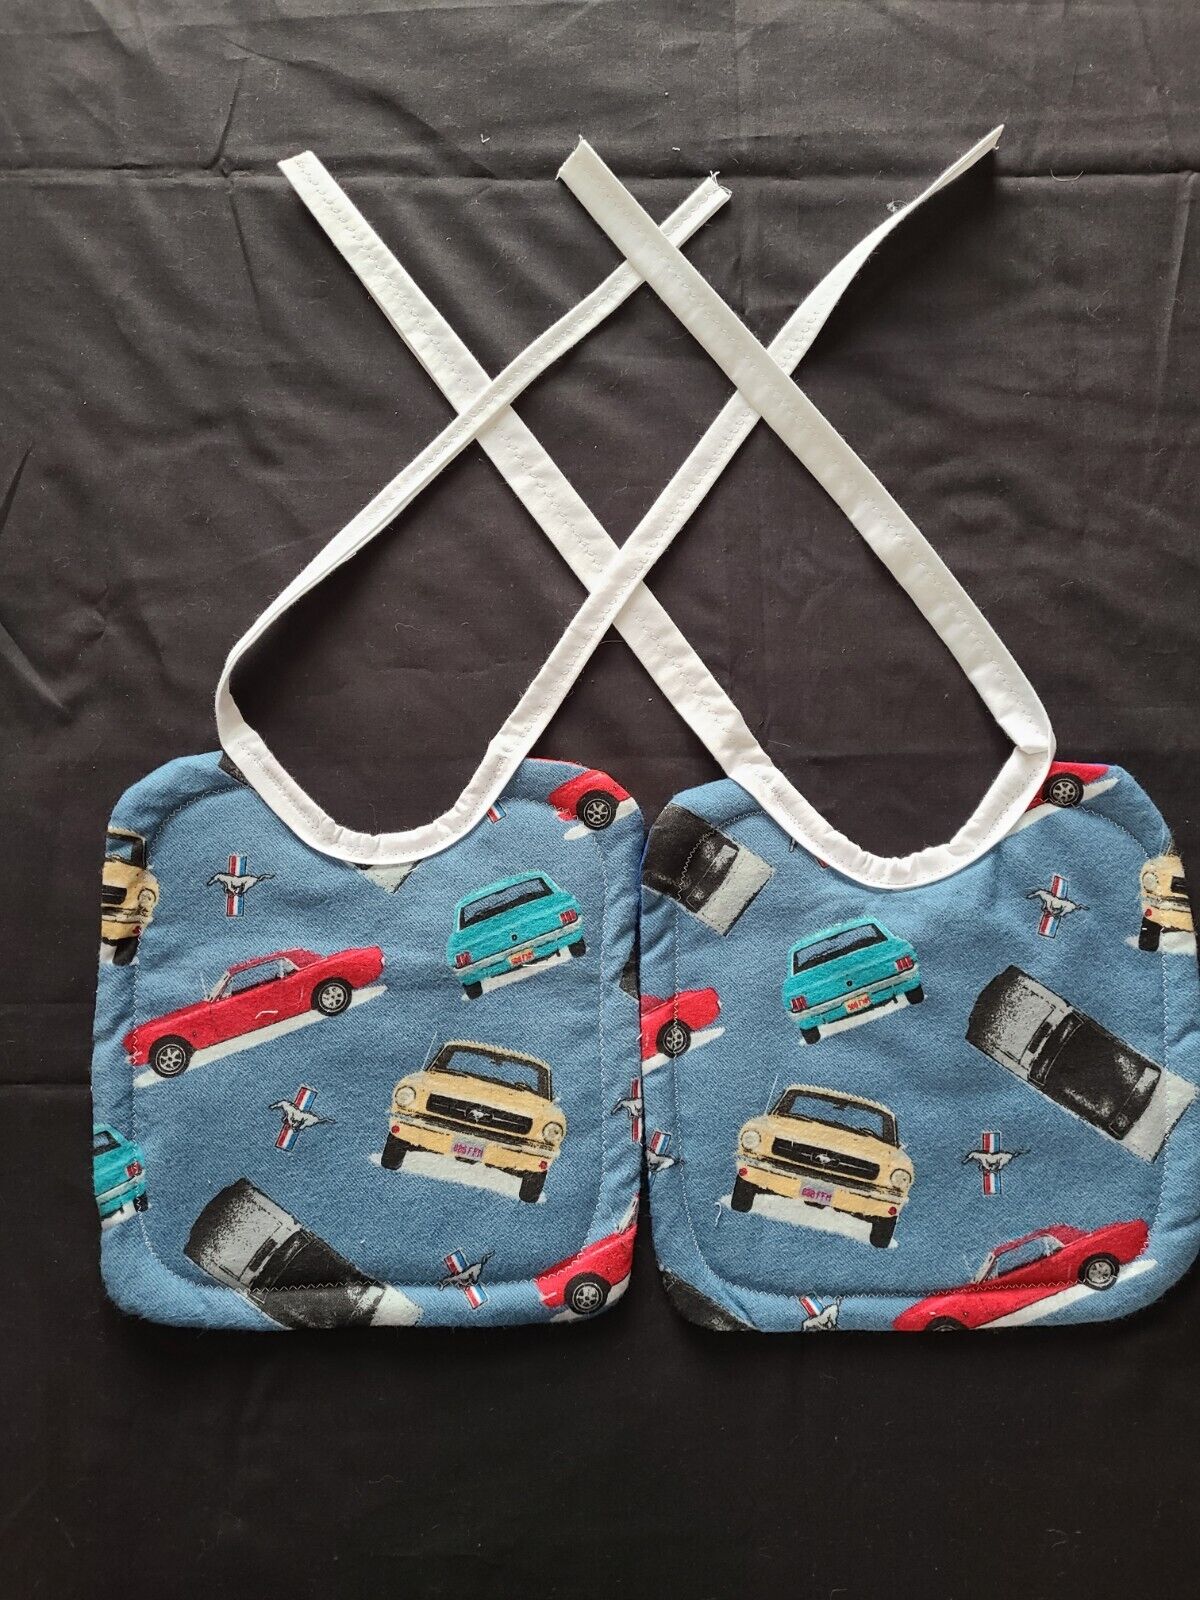 2 NEW LARGE HANDMADE FORD MUSTANG BABY/TODDLER BIBS WITH TIES